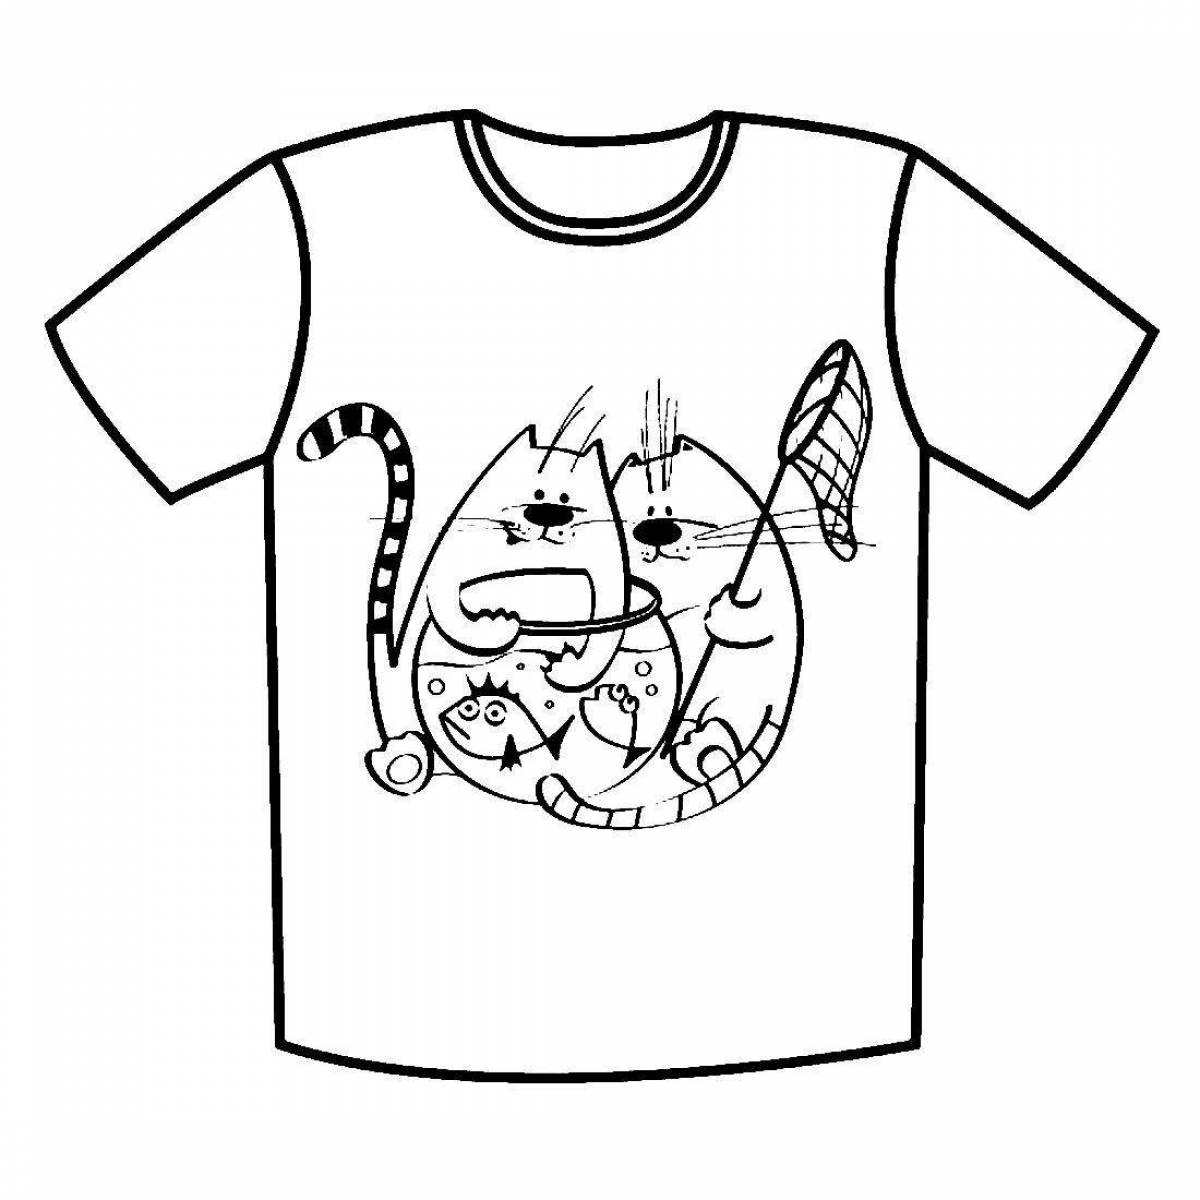 Colouring page with amazing t-shirt for a boy